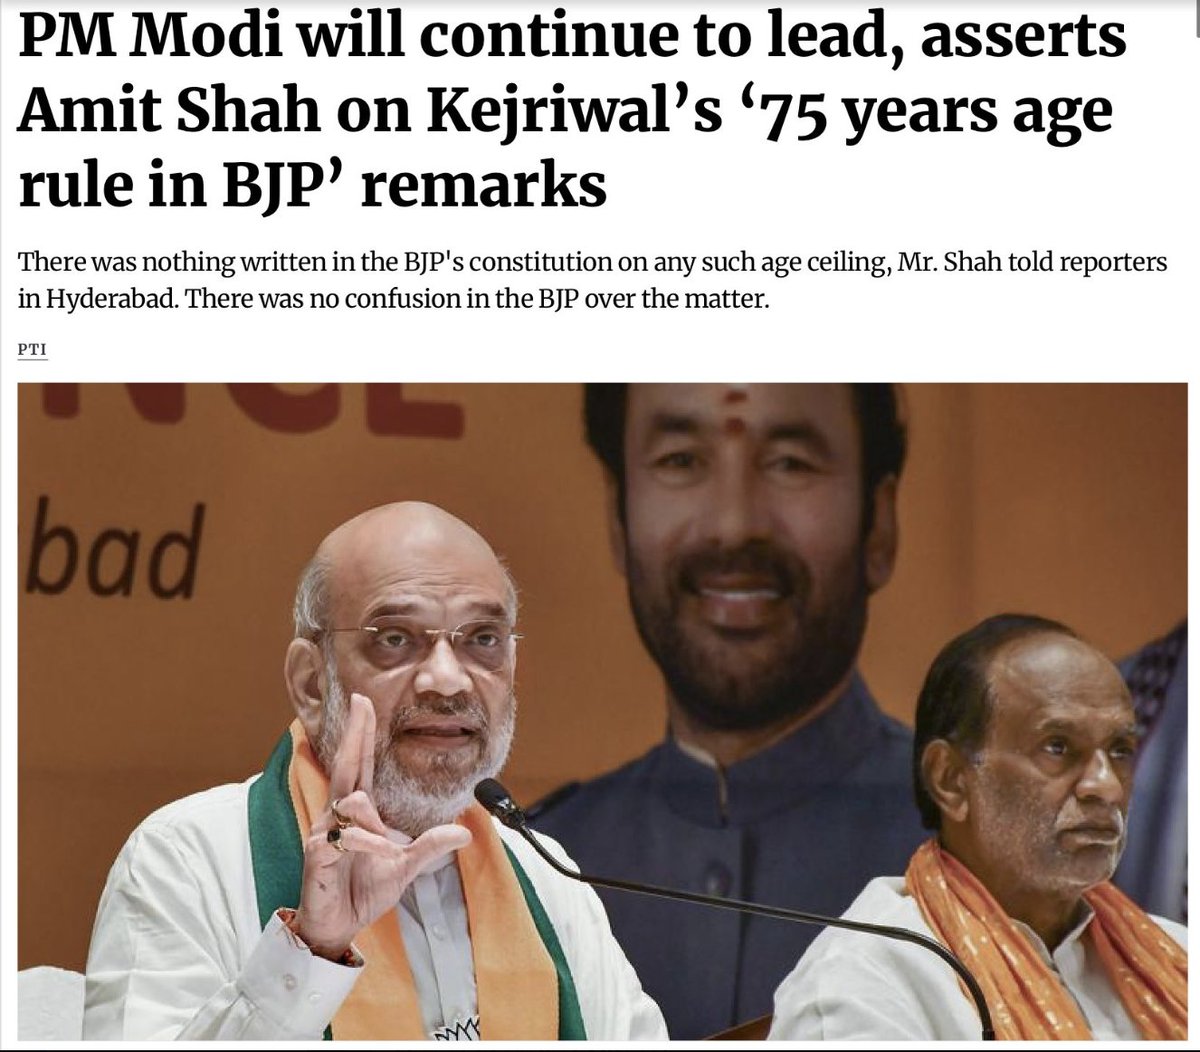 LK Advani and MM Joshi (Former BJP Presidents and staunch RSS men who played an active role in the demolition of Babri Mosque. Advani co-founded the BJP) were sidelined by Modi in 2019, saying they were over 75 years old.
Amit Shah says the age limit won't apply to Modi!